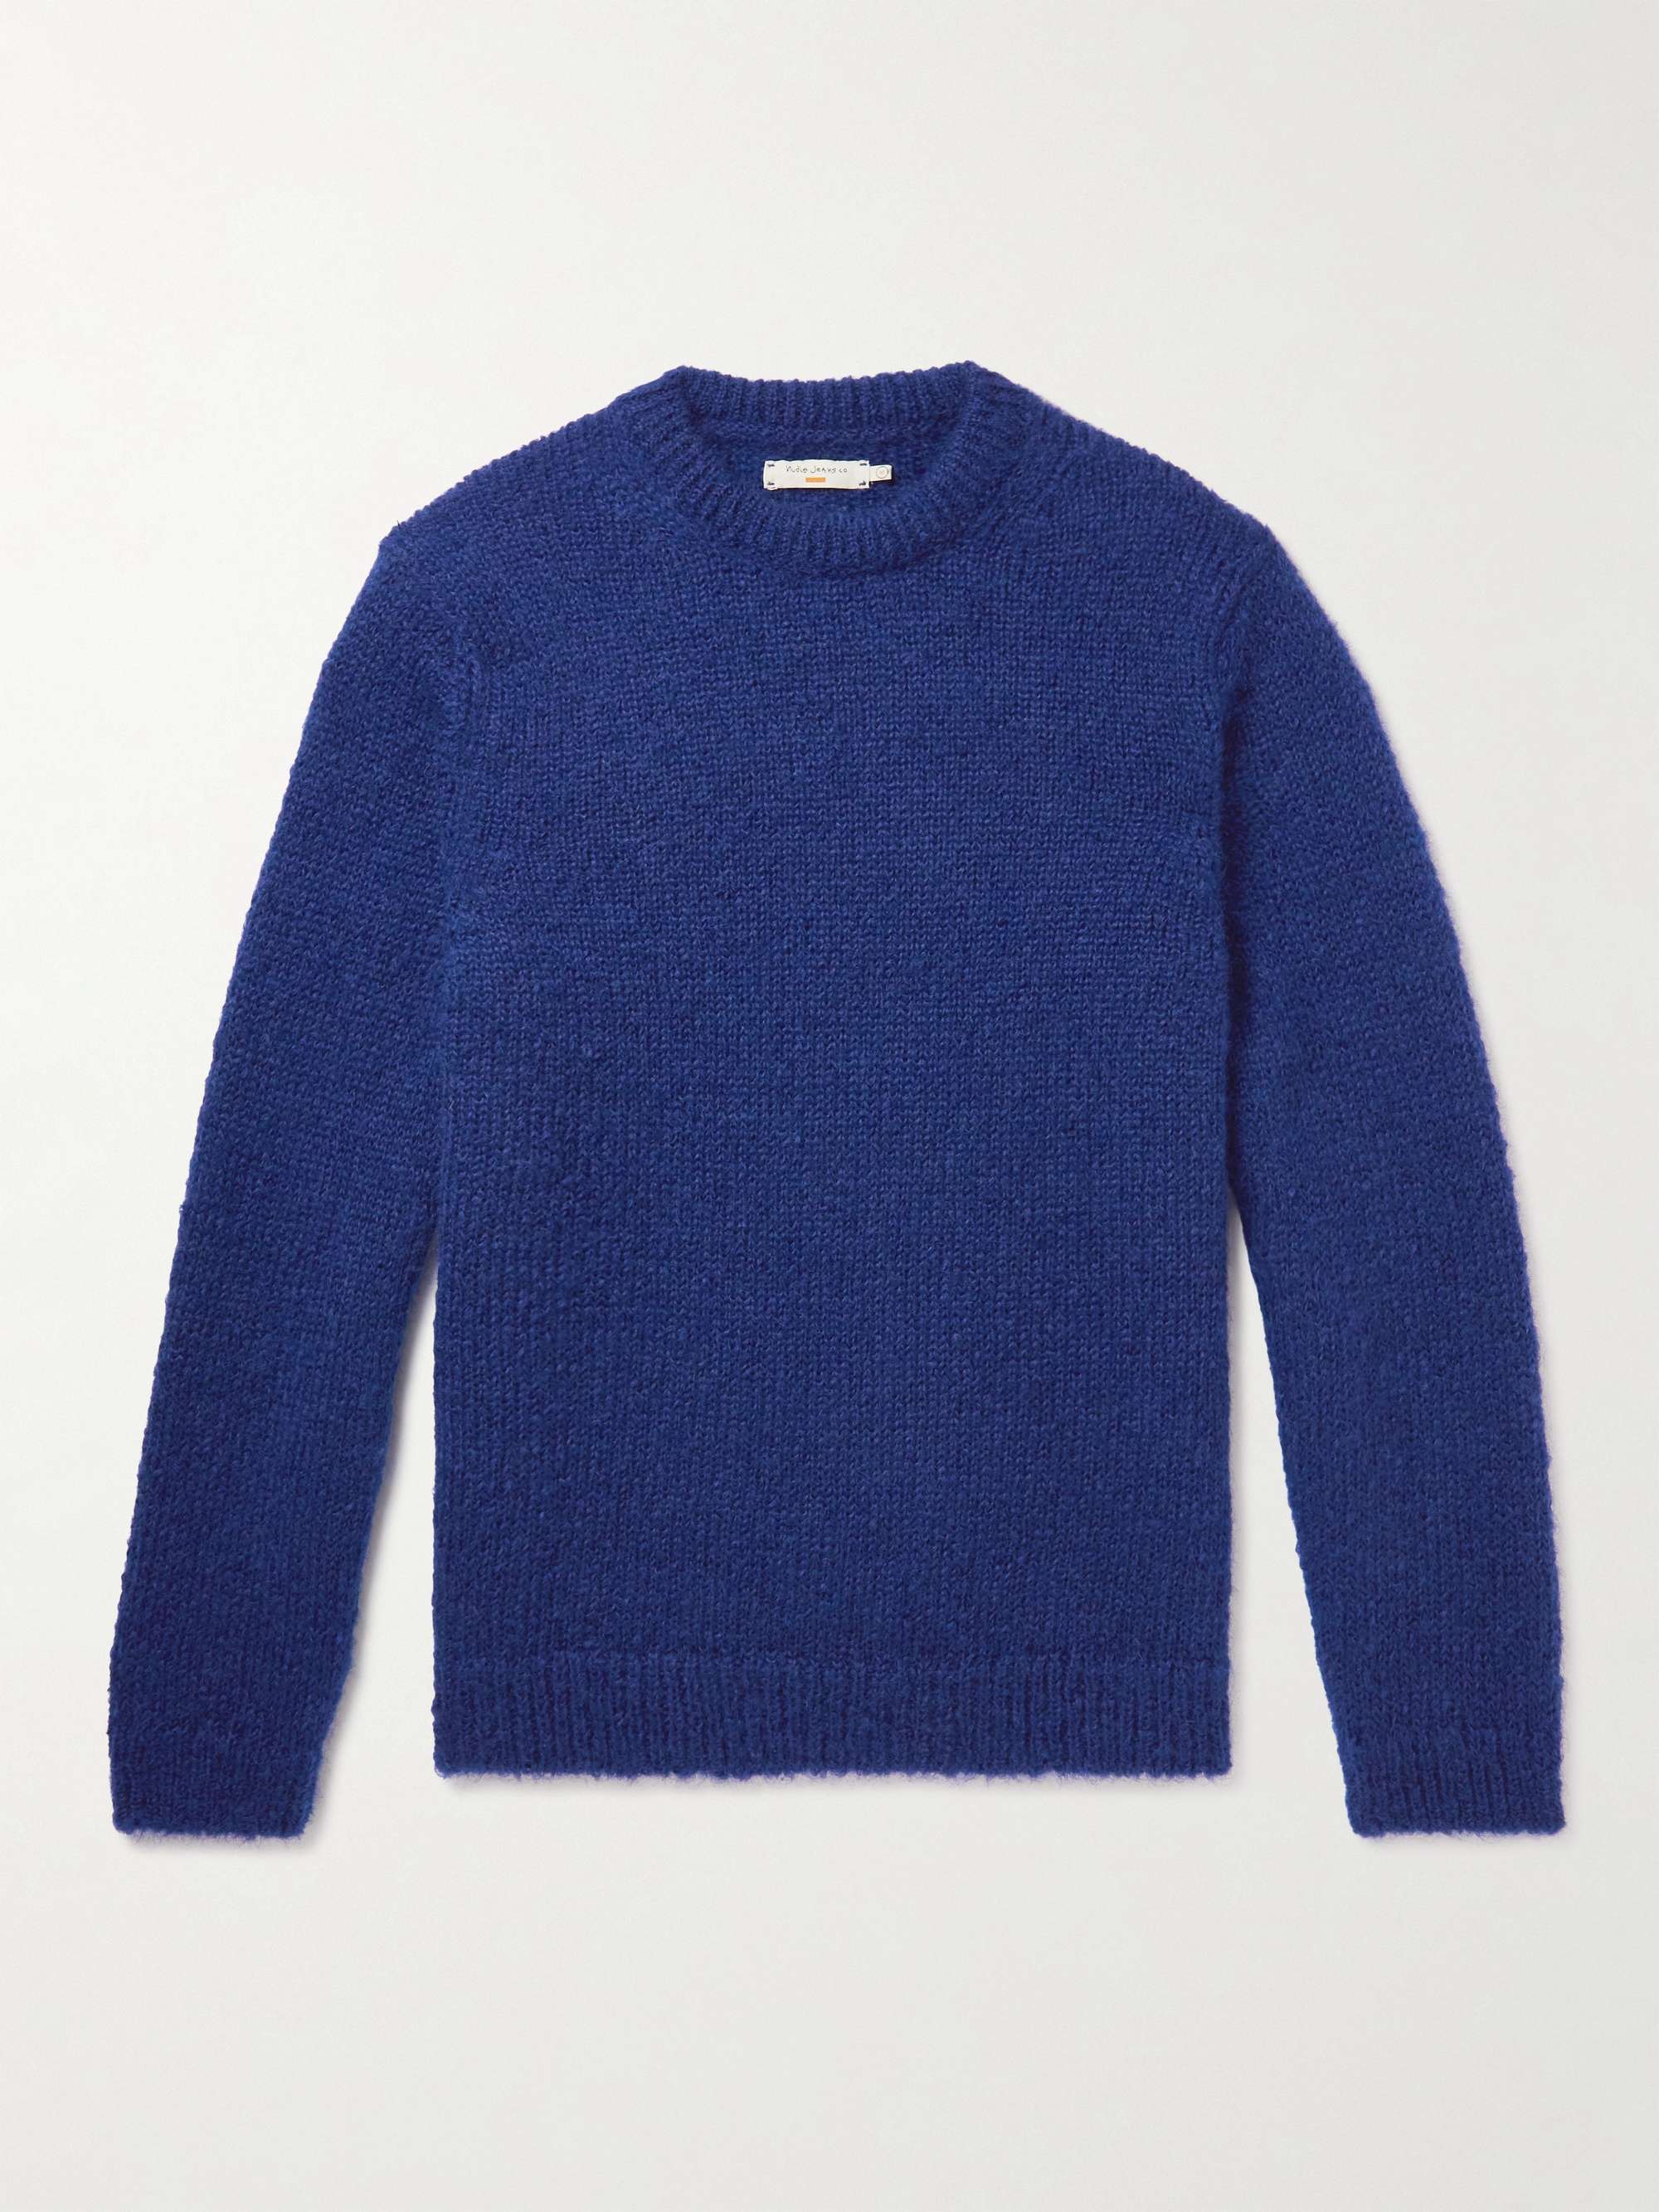 NUDIE JEANS August Mohair Sweater | MR PORTER